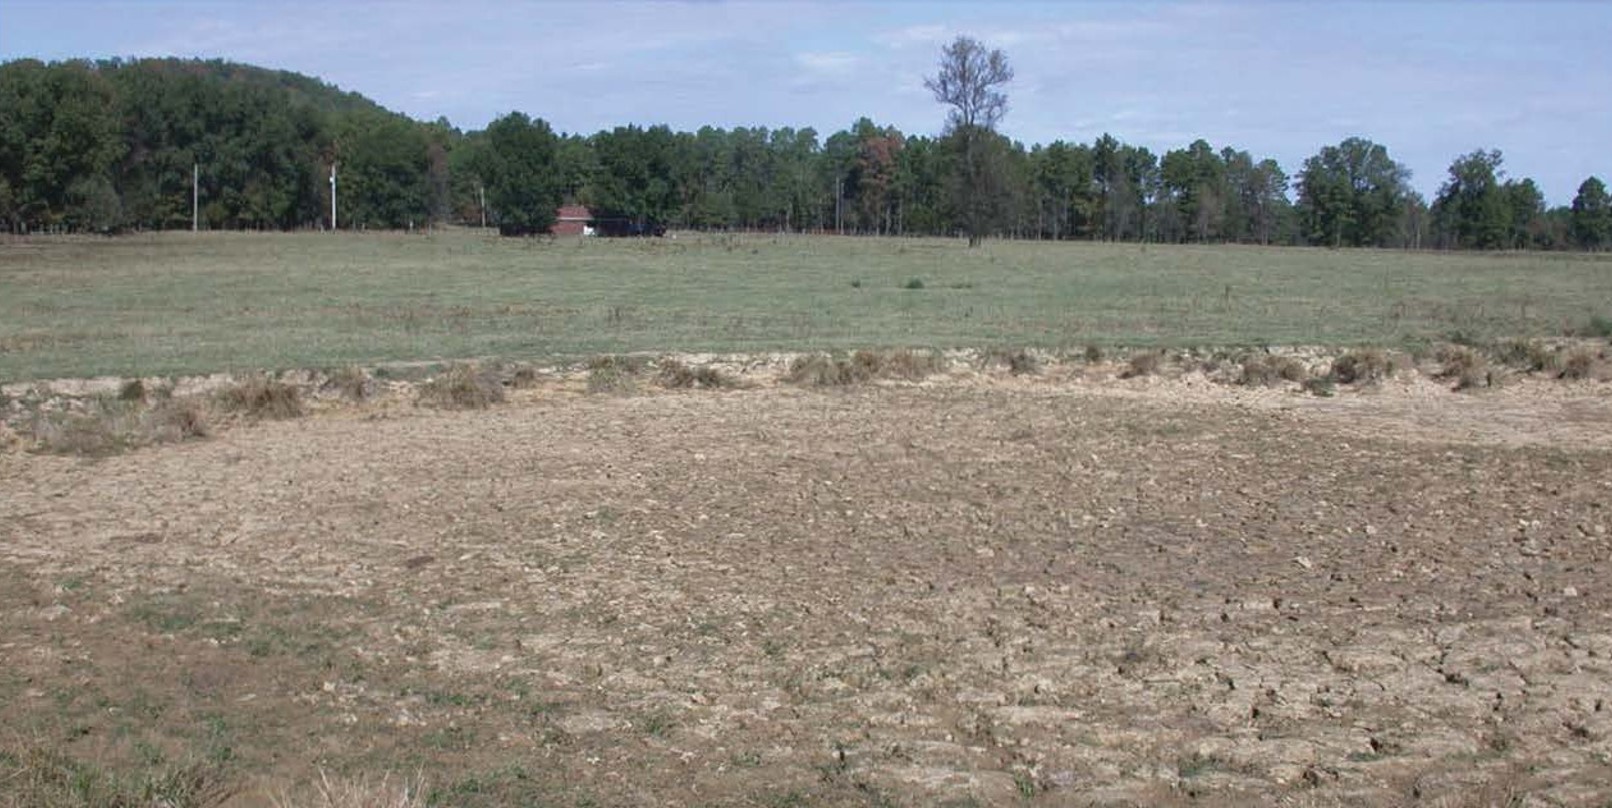 Effects of drought in Arkansas, with a dried pond in the foreground and a pasture with minimal forage in the background.